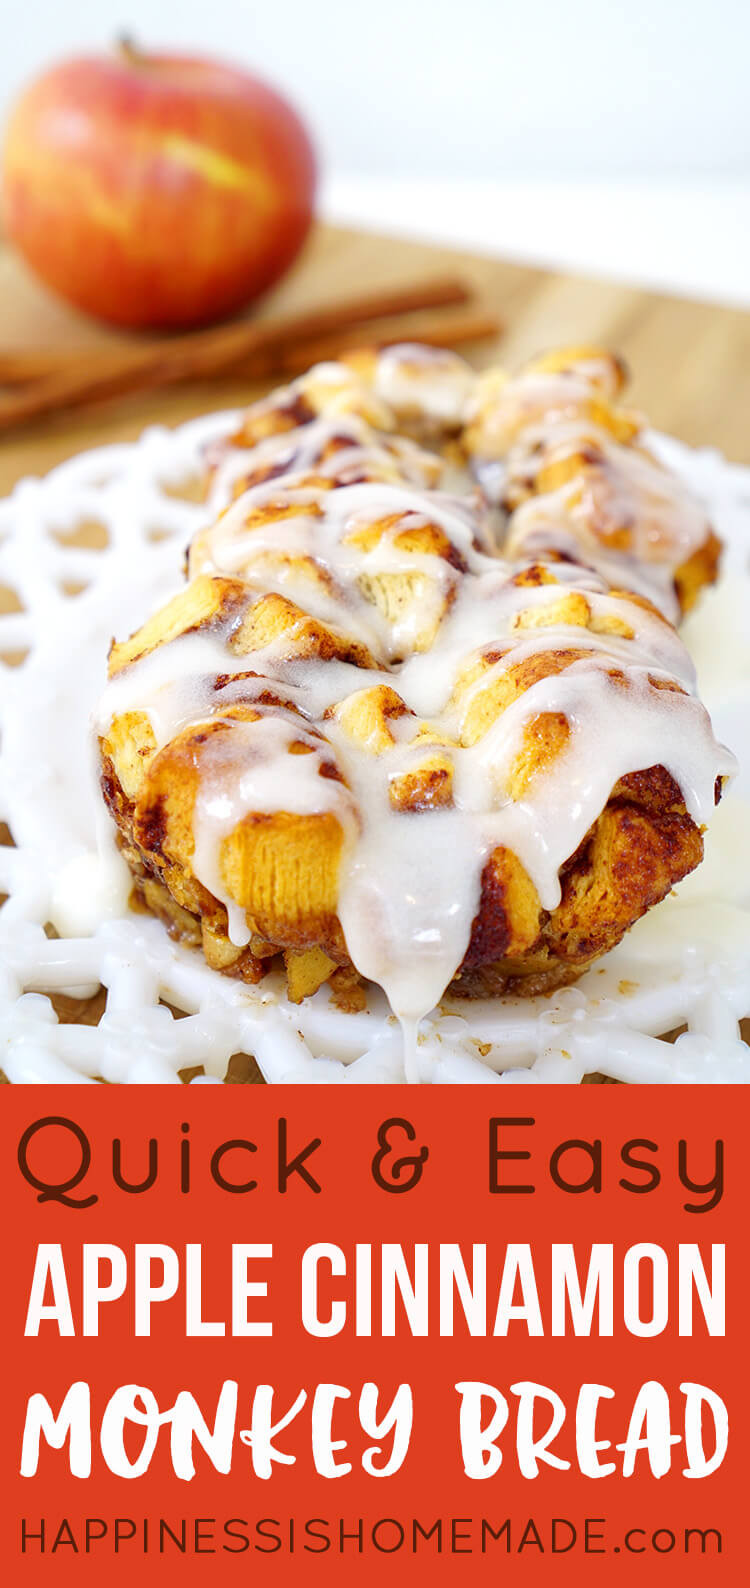 Quick And Easy Monkey Bread Recipes
 Apple Cinnamon Monkey Bread Happiness is Homemade